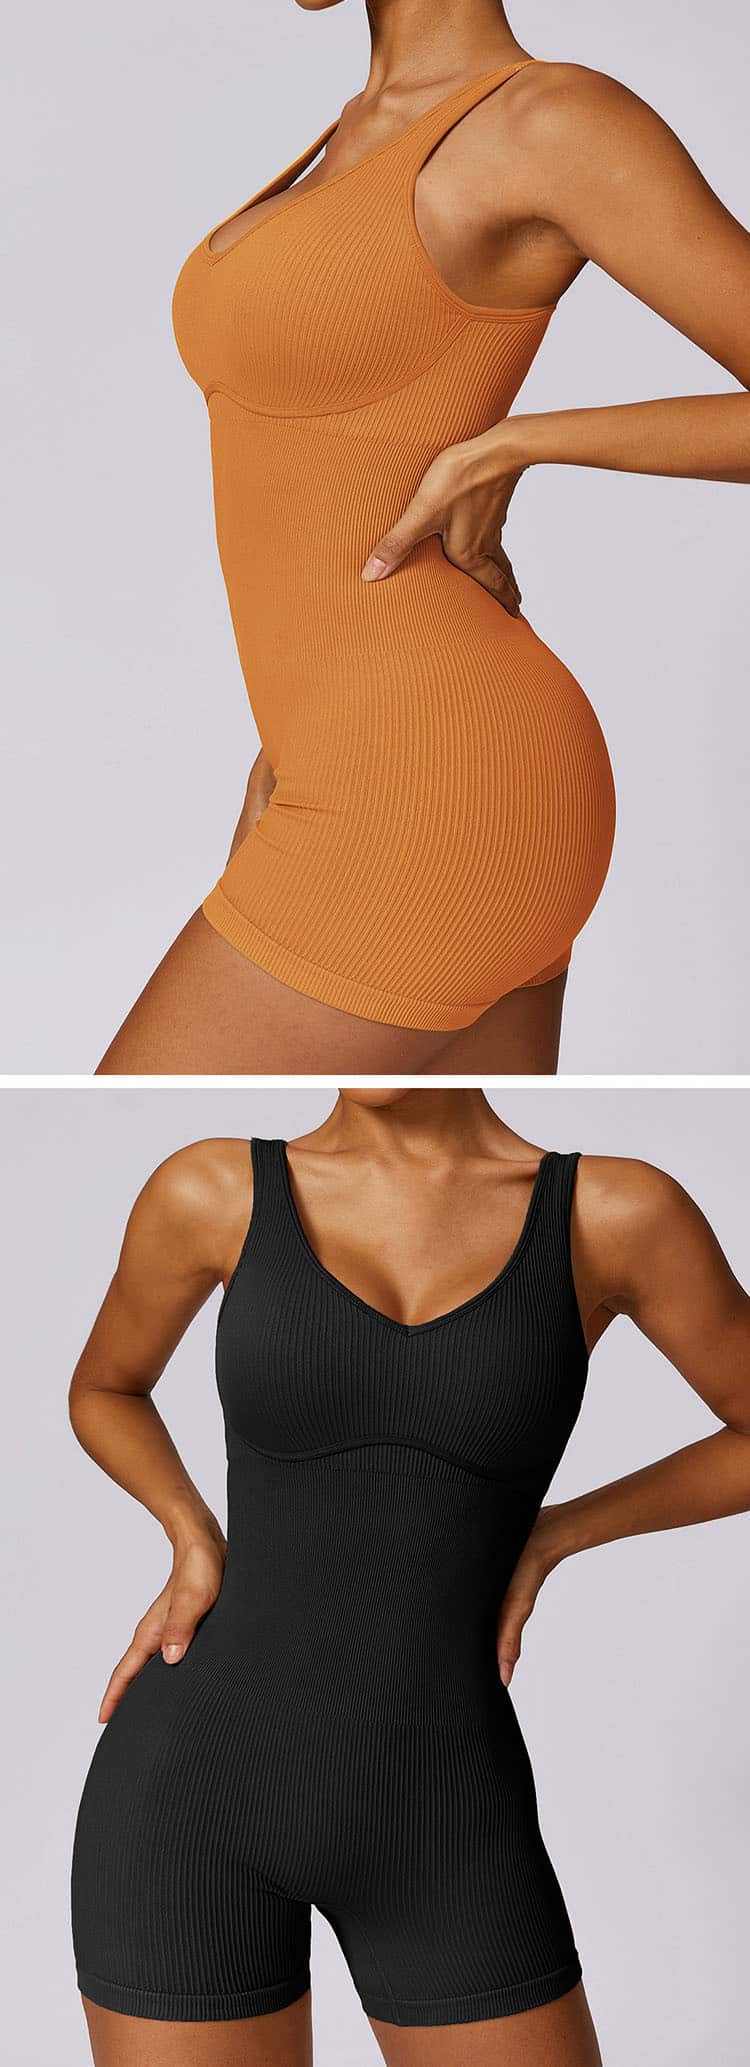 High-quality fabrics are used to absorb moisture and sweat, and the exercise experience is enjoyable